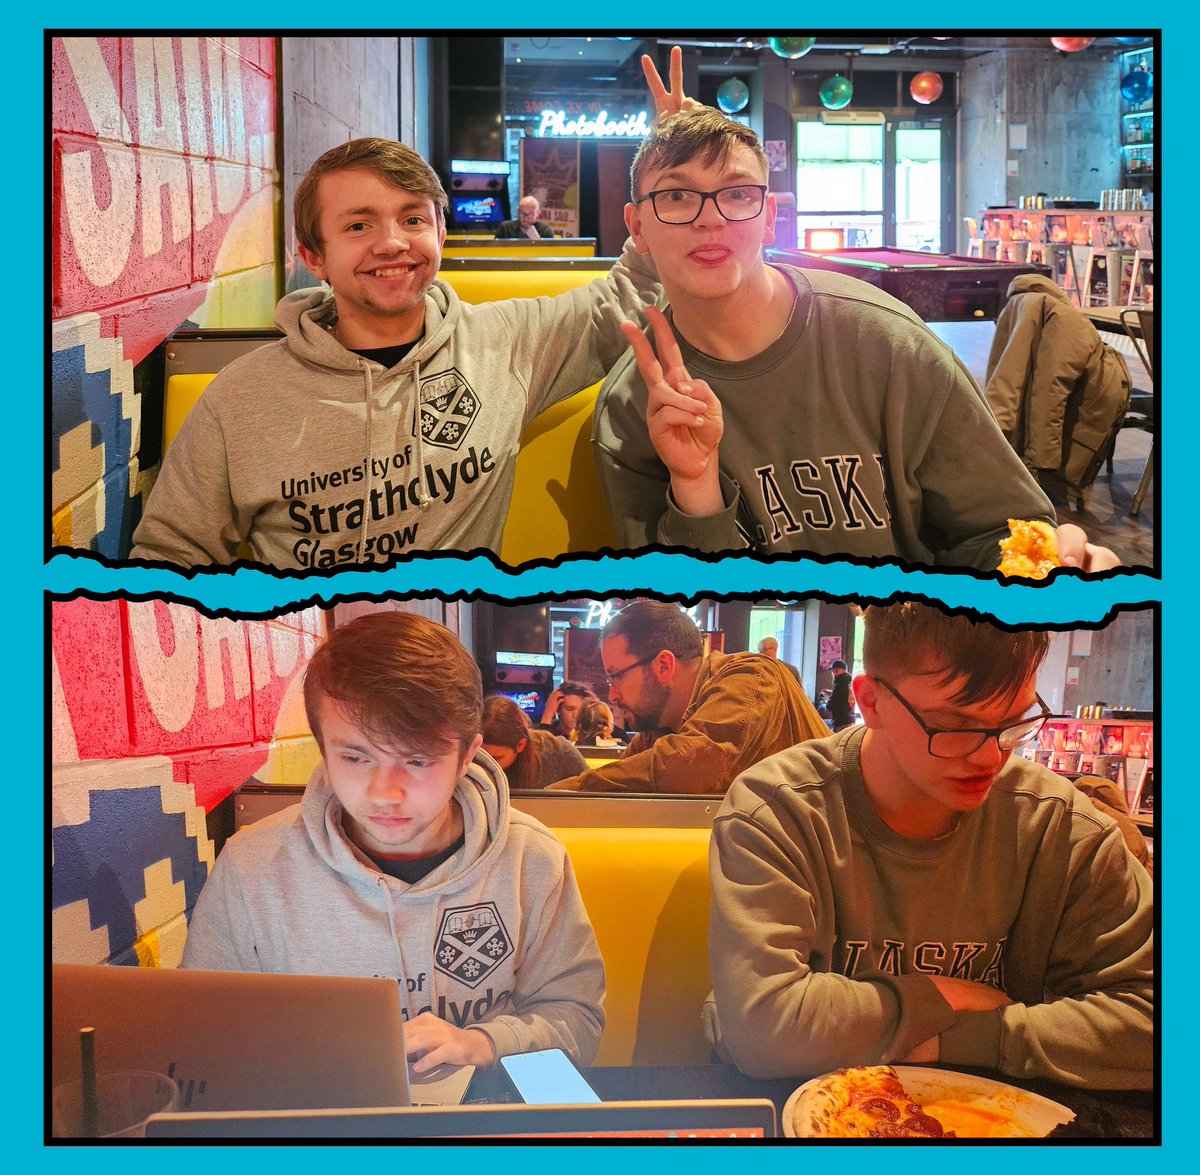 In a few weeks, Andrew and Dylan will be giving a presentation to panel members about small changes that can be made to support young people attending hearings. We had a busy pizza and planning session in Glasgow today 🍕👨‍💻